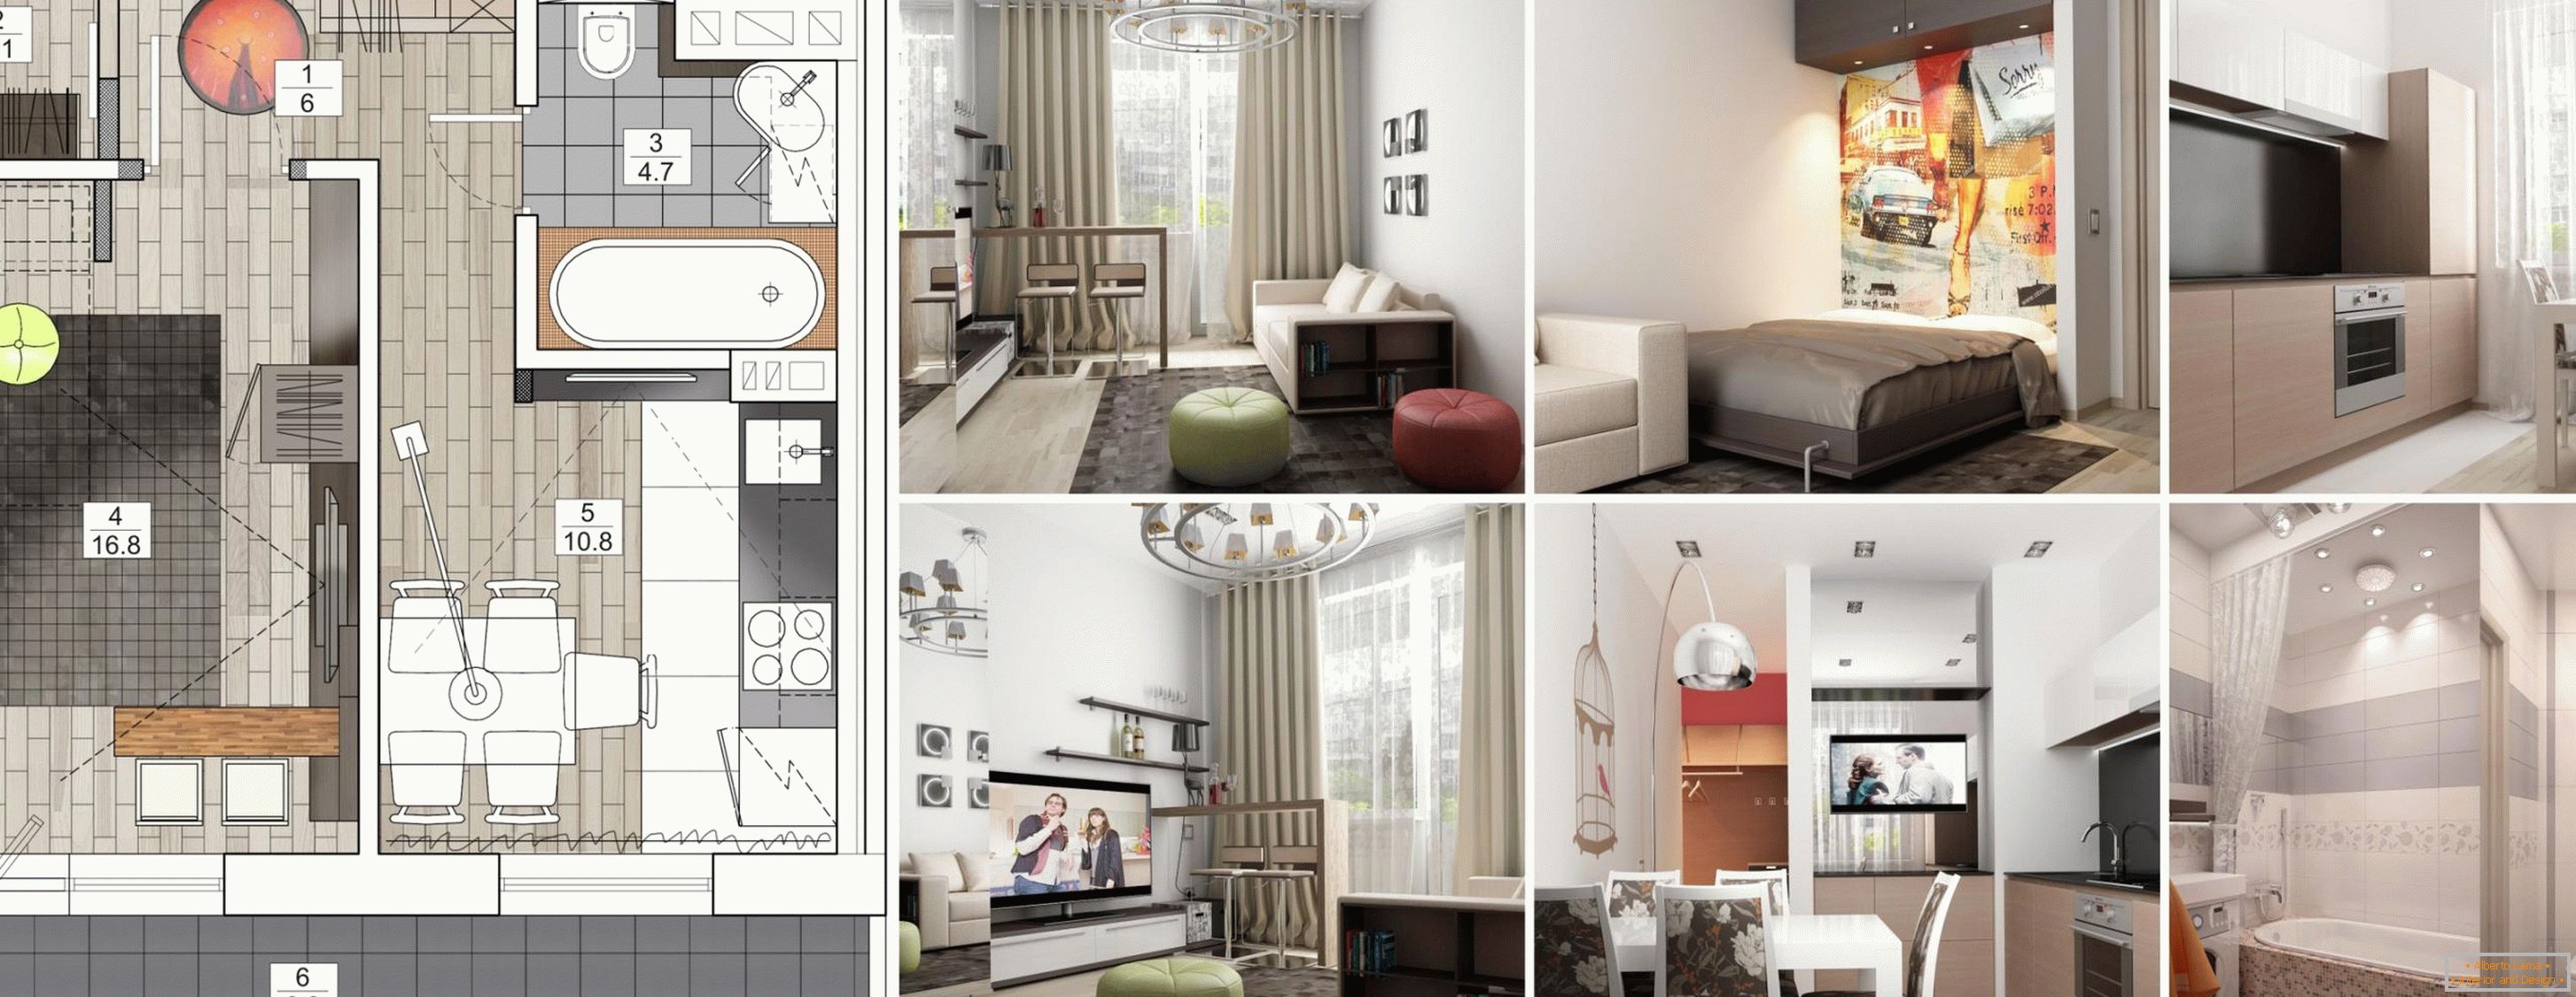 Design project of an apartment of 46 square meters.